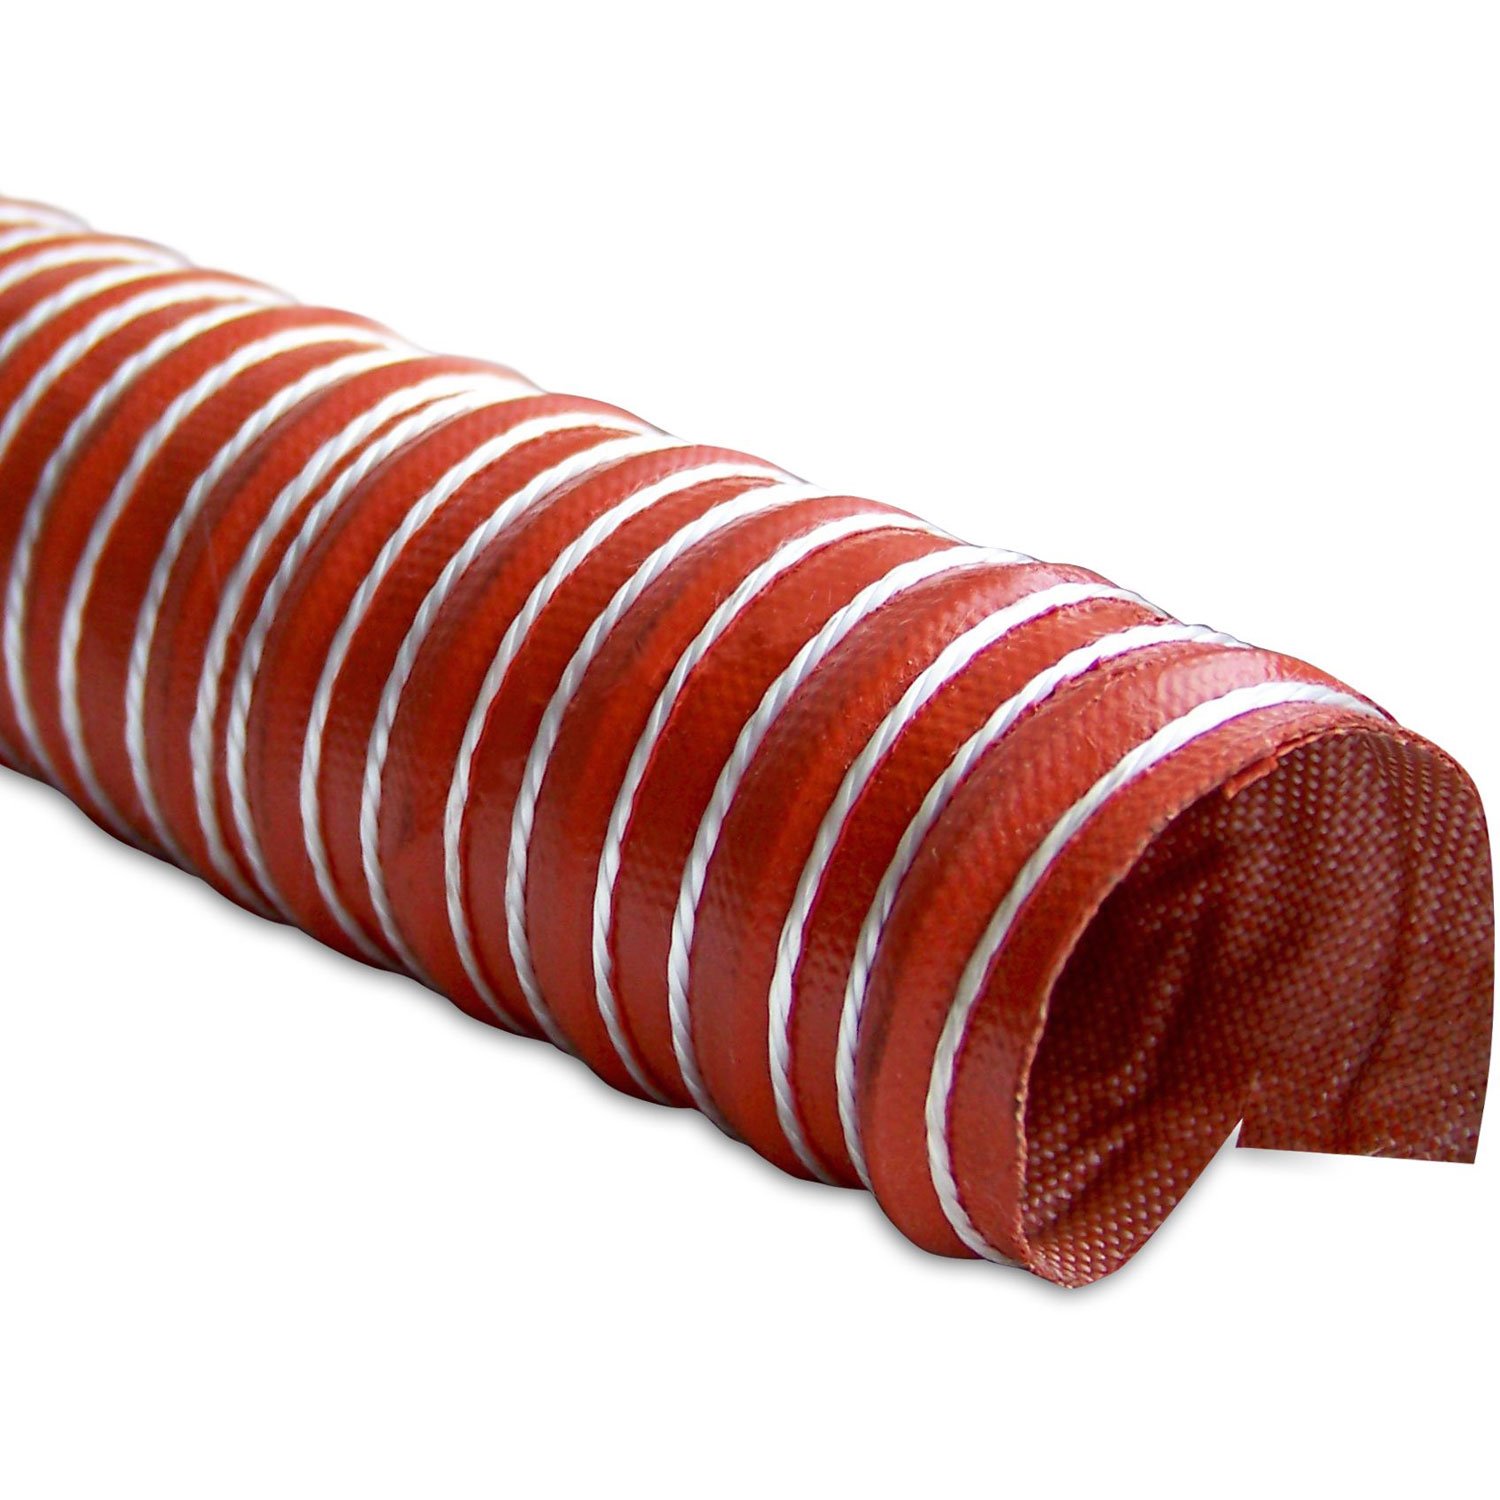 Heat Resistant Silicone Ducting 2 x 12 -